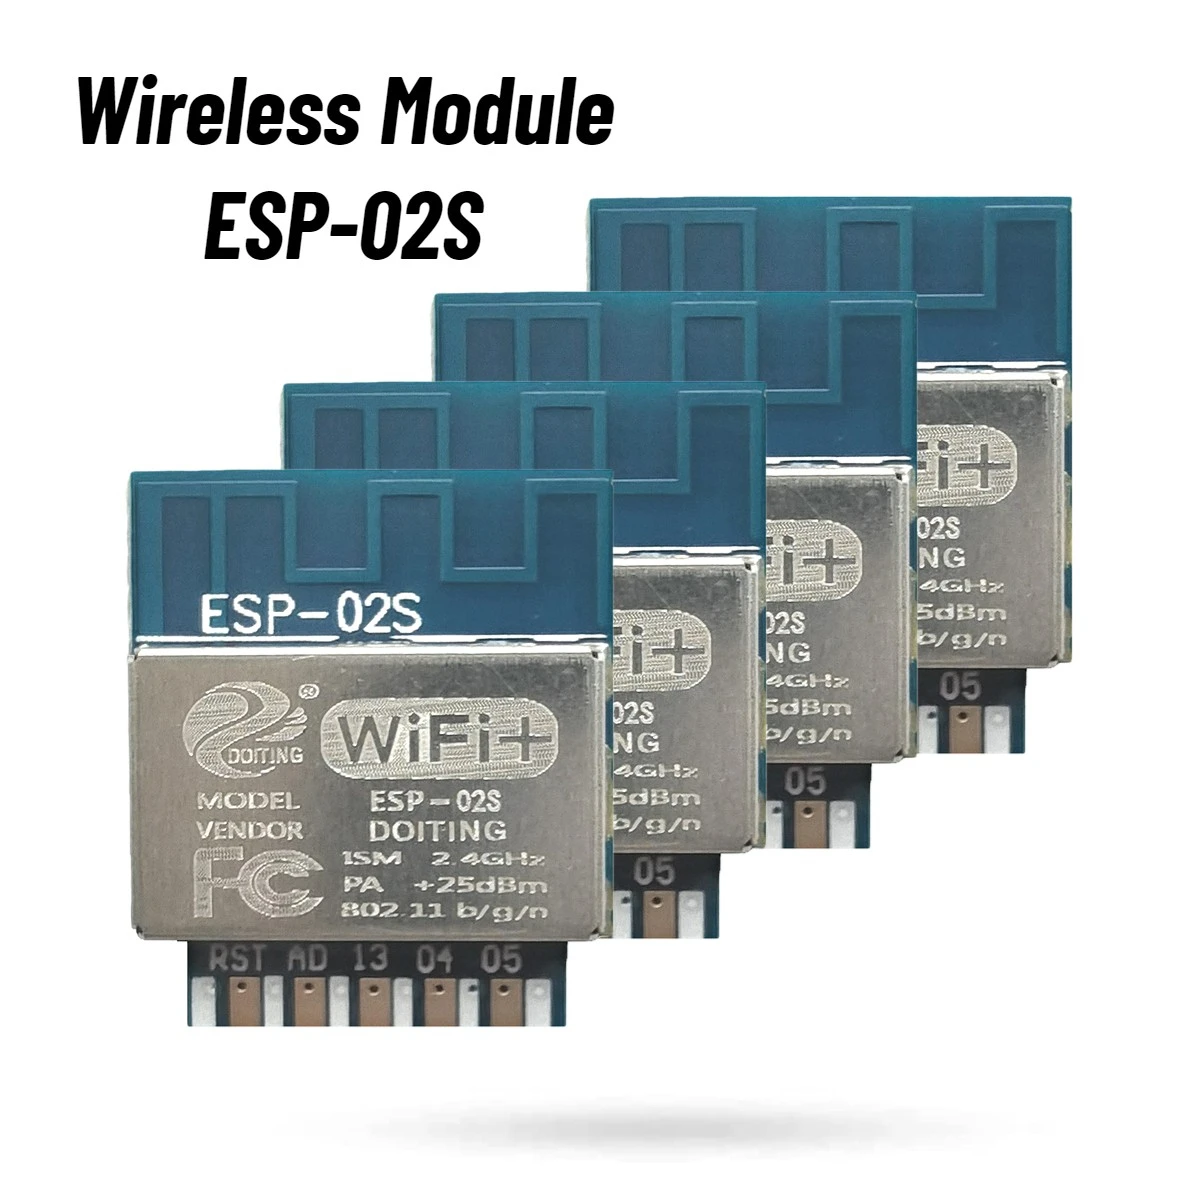 Doit.am ESP8266 ESP-02S TYWE2S Serial Wireless Wifi Transceiver Module Compatible with ESP8266 For Smart Home